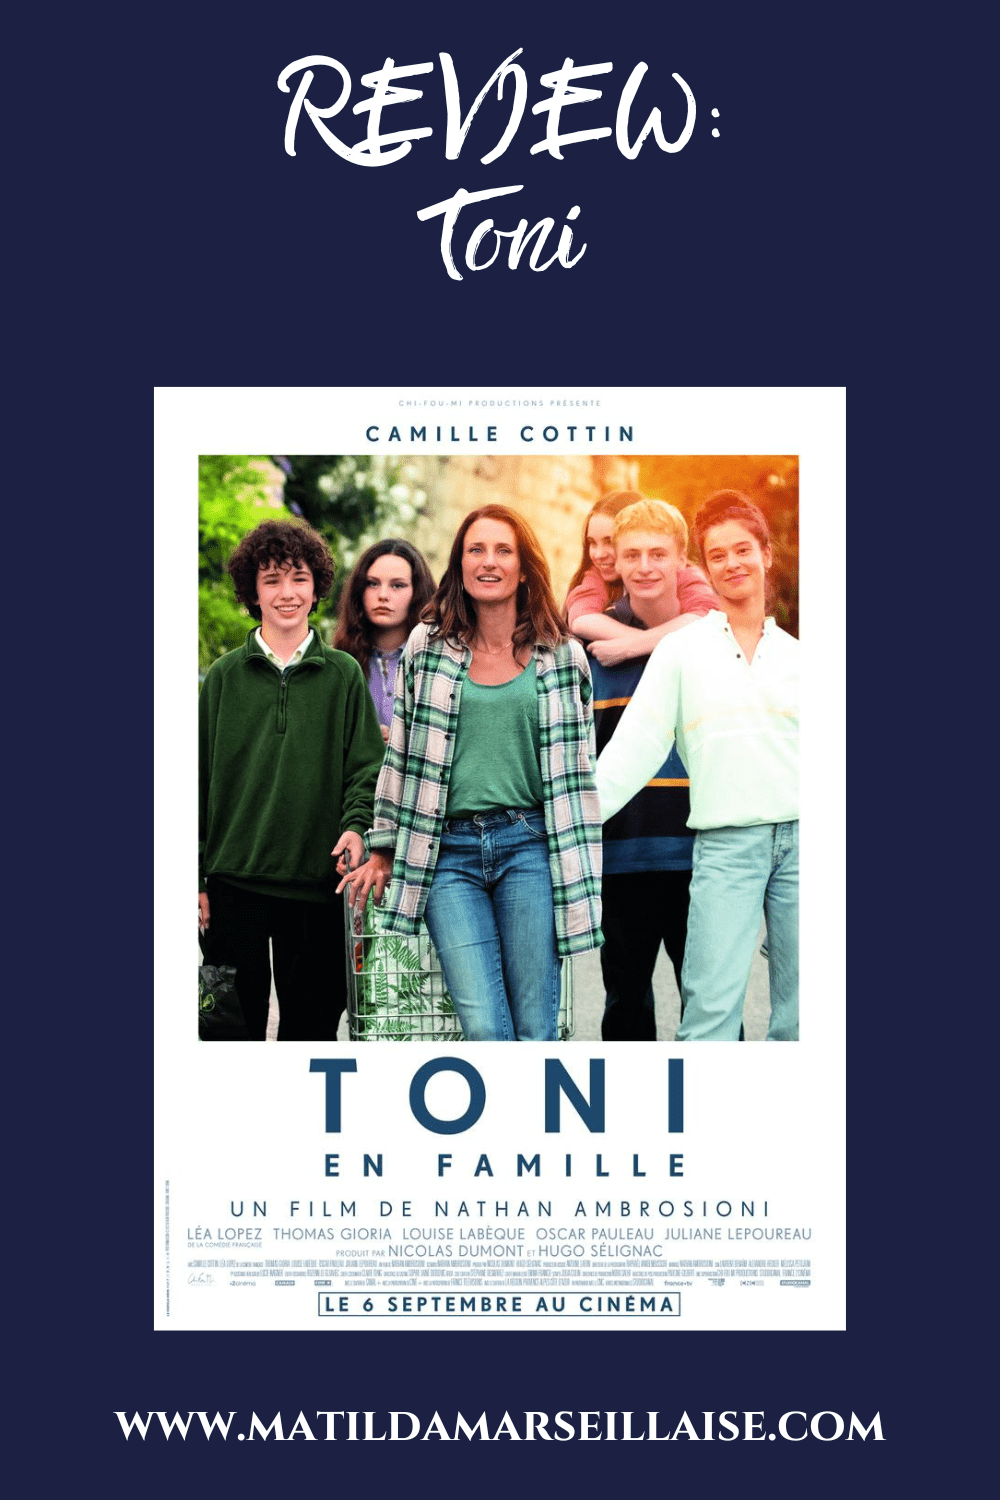 In Toni, Camille Cottin stars as a single mum of 5 exploring life’s possibilities after kids